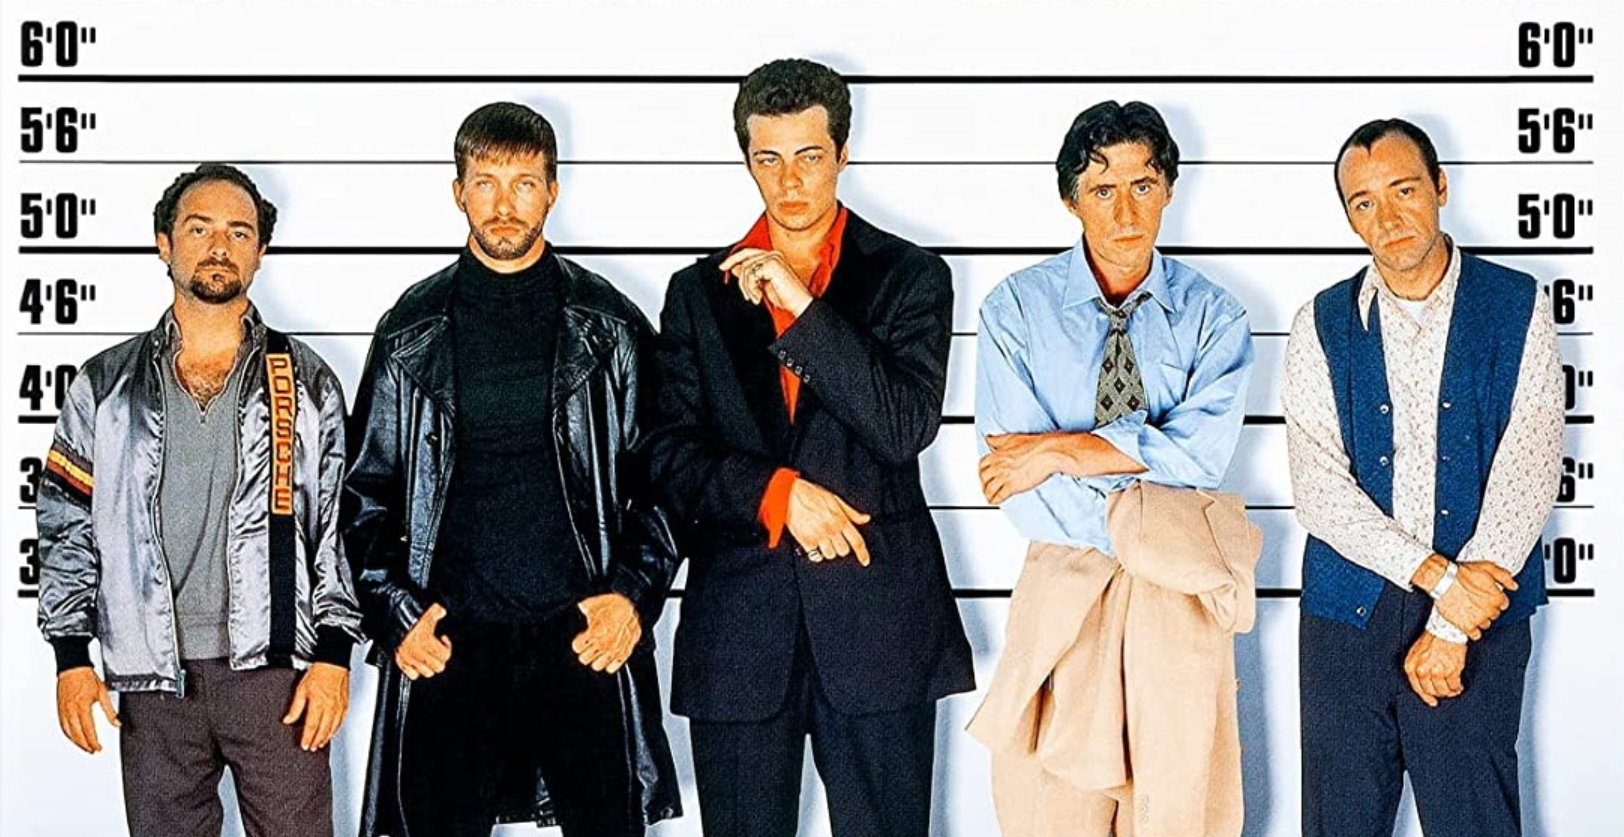 The Ambiguous Ending of The Usual Suspects…